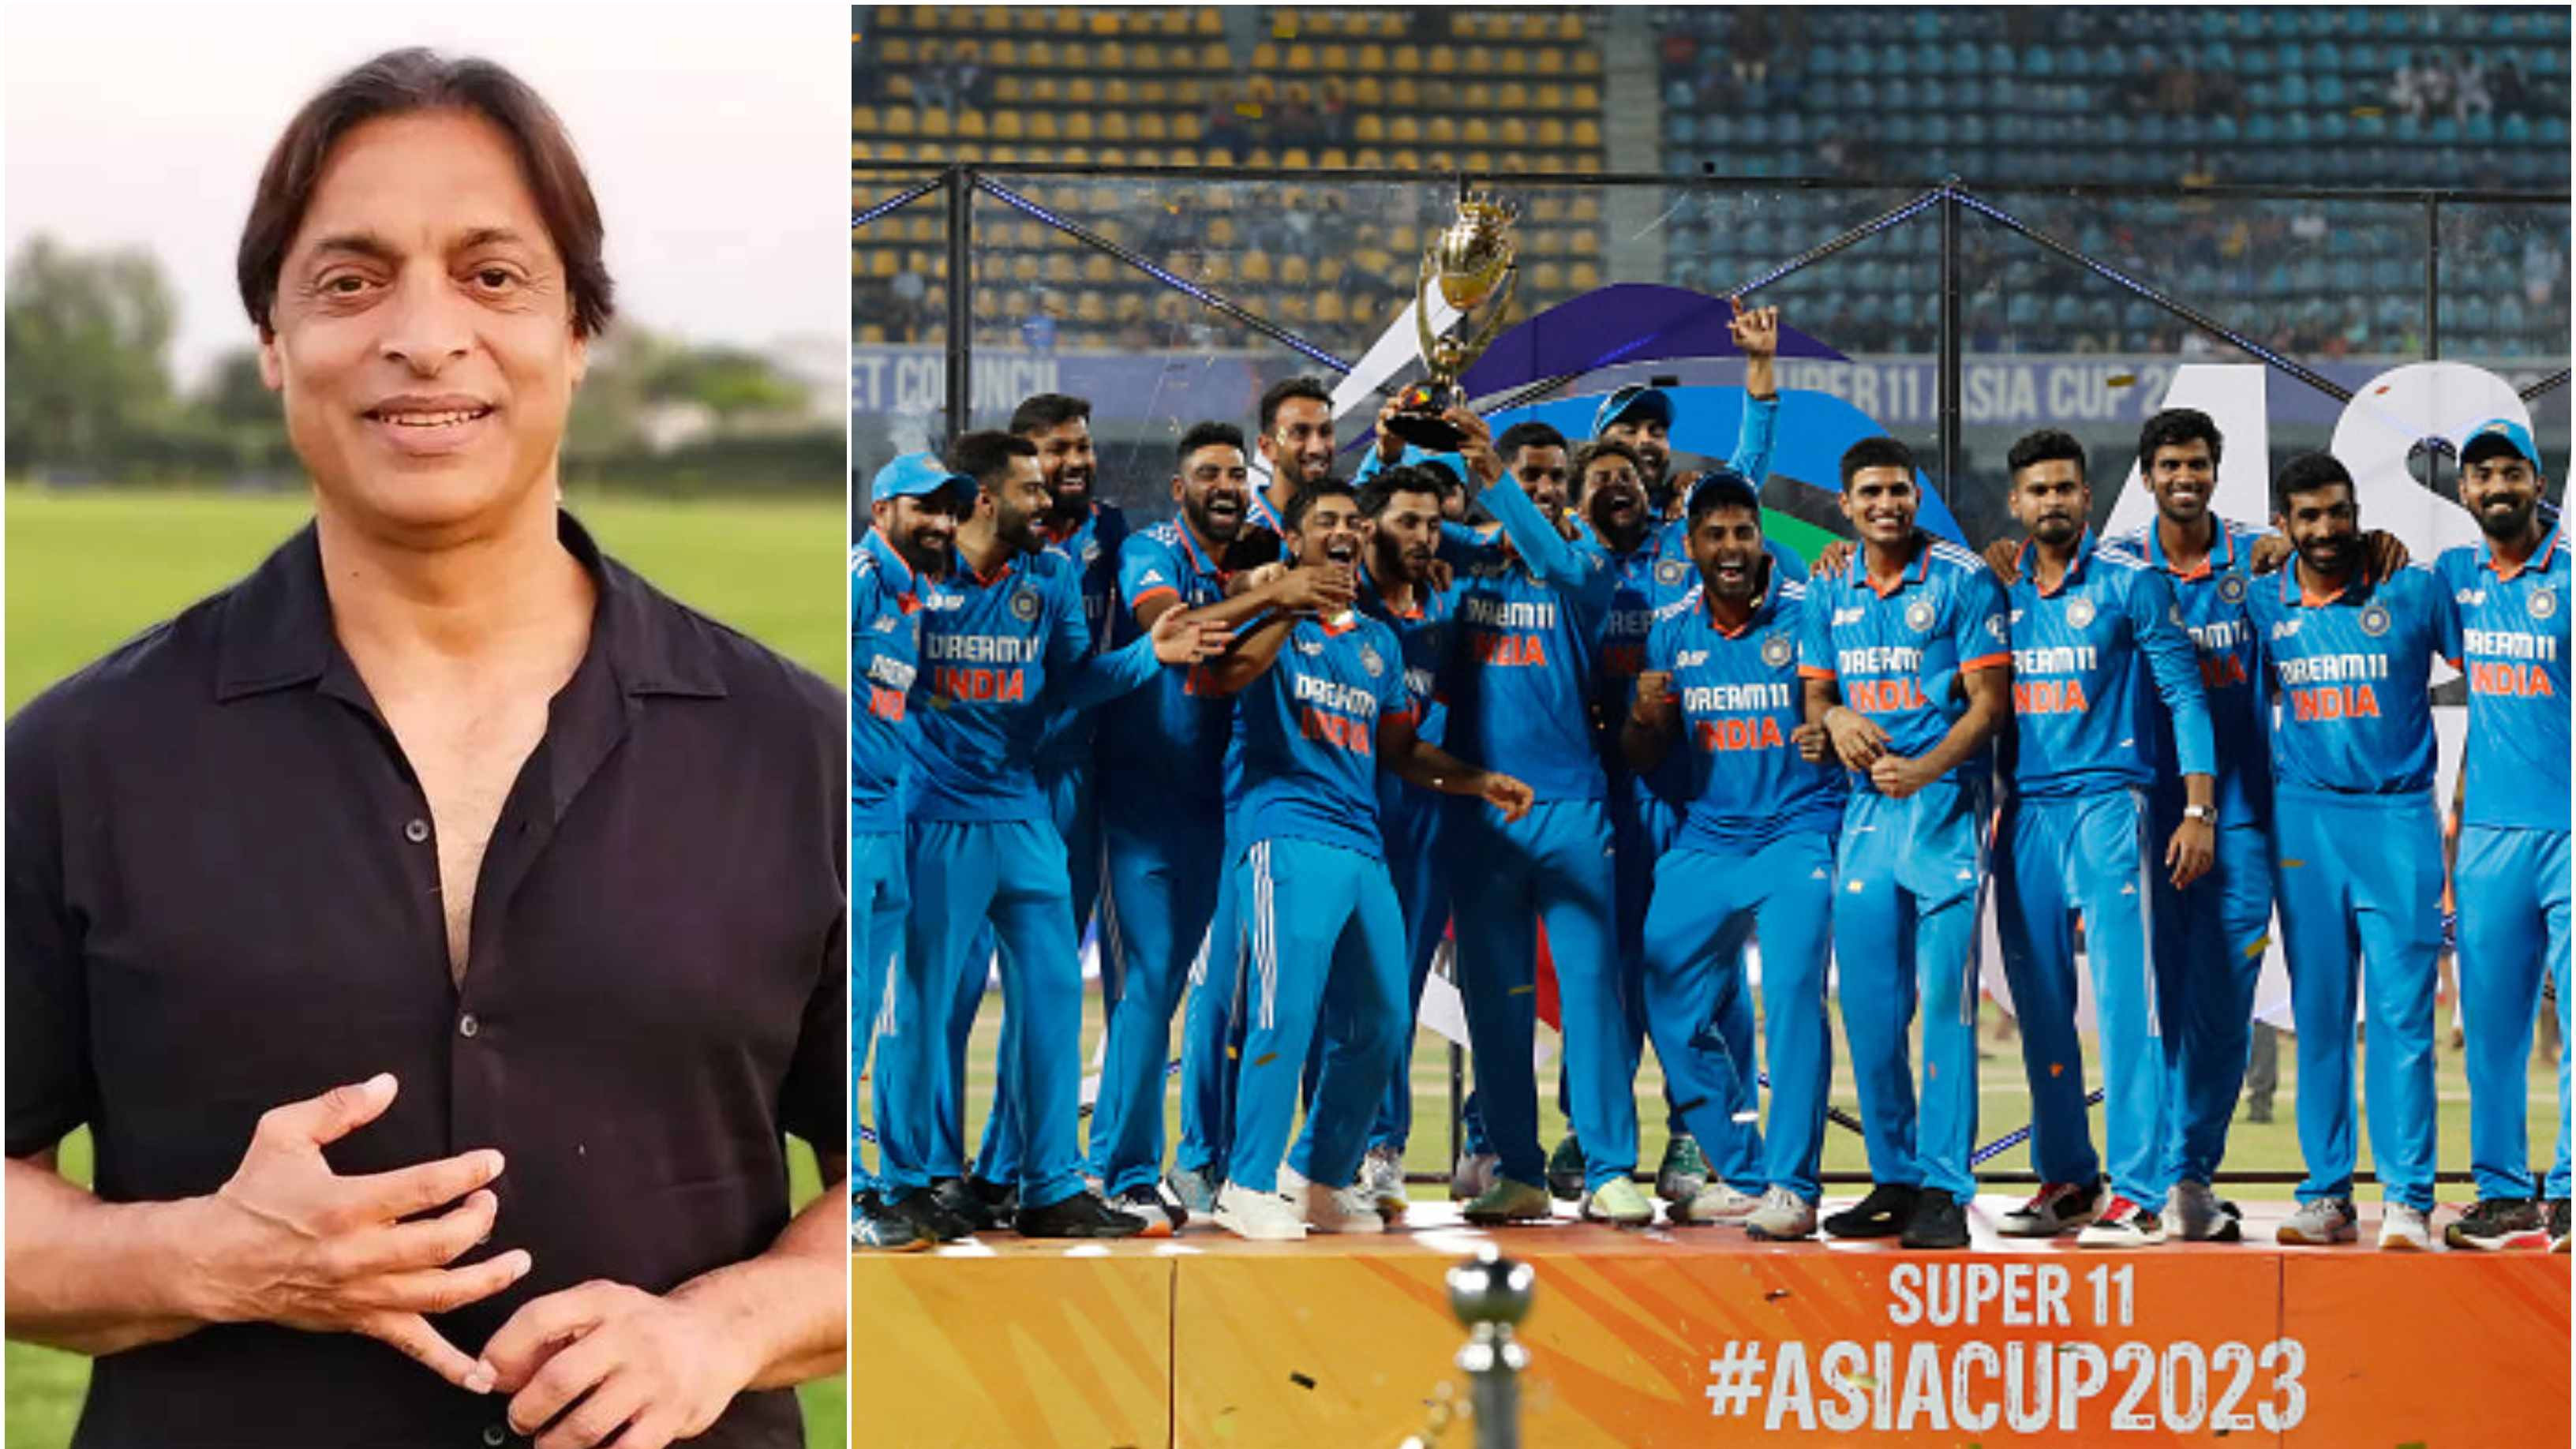 “India could be the most dangerous side in World Cup,” says Shoaib Akhtar after India’s 10-wicket win in Asia Cup final